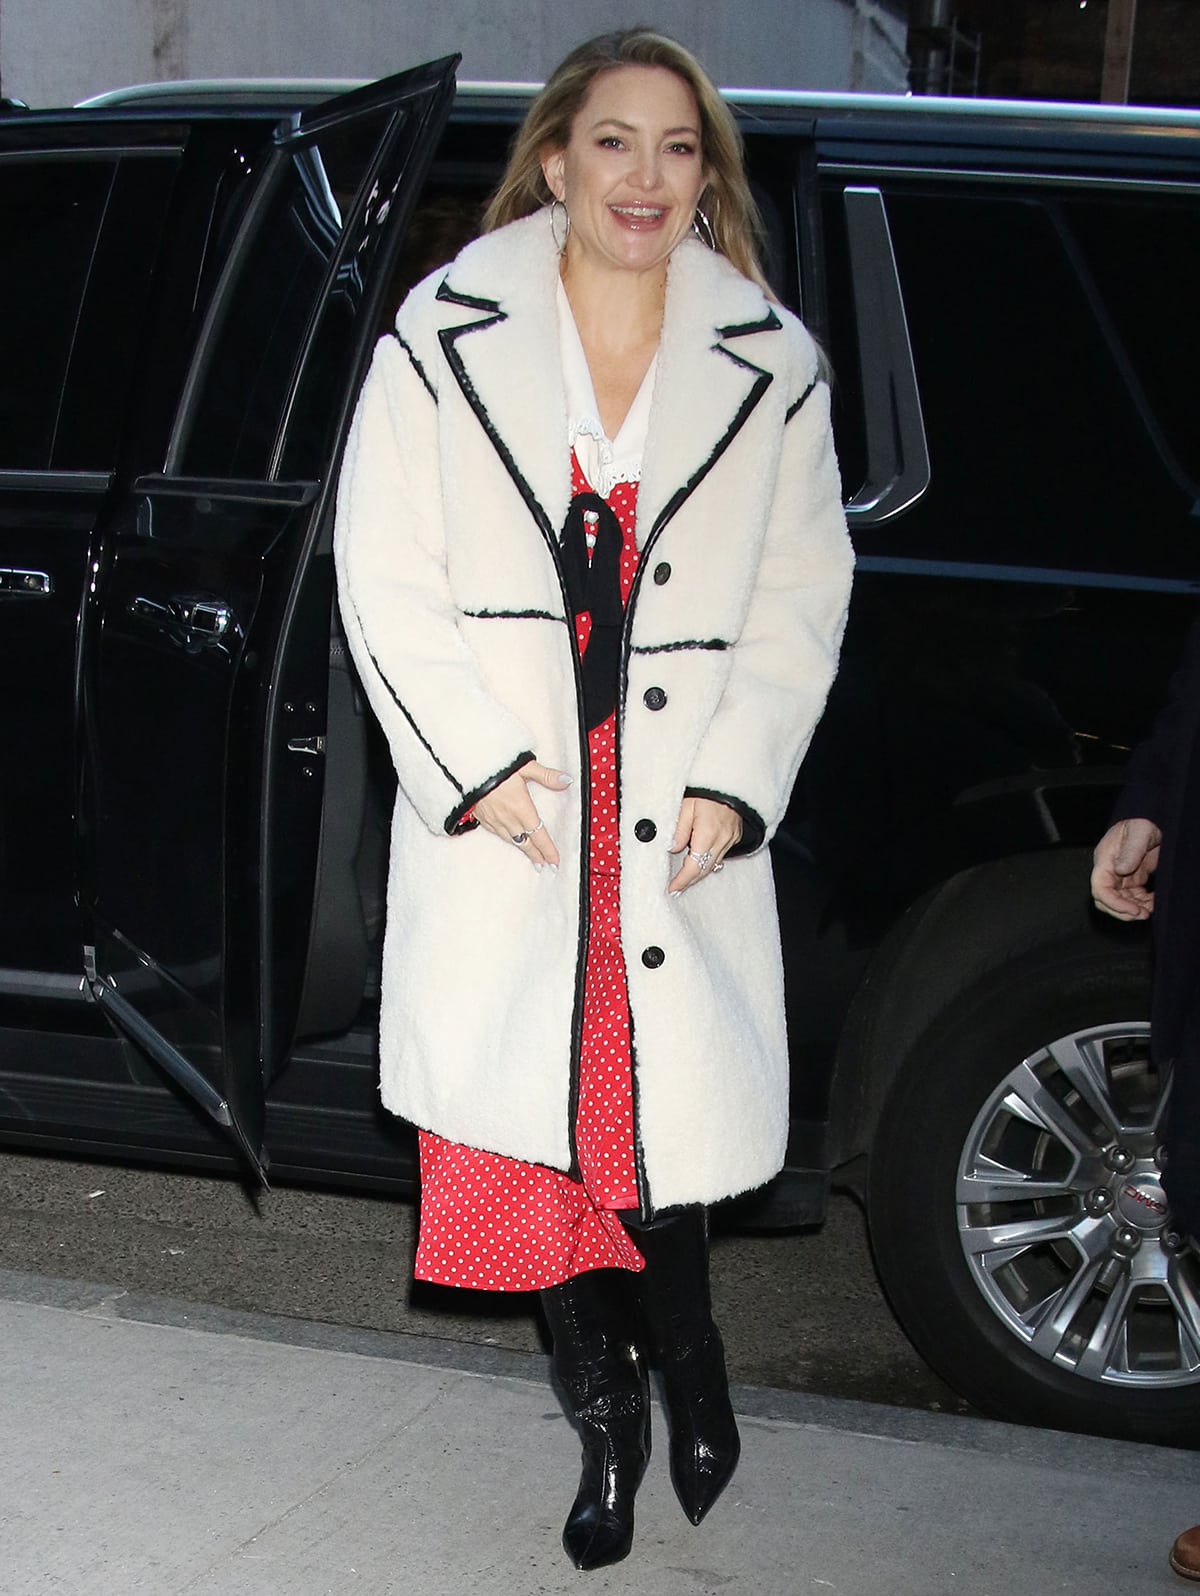 Kate Hudson arrives at The Today Show studios in a retro red polka dot dress by Alessandra Rich and a faux sheepskin coat by Maje